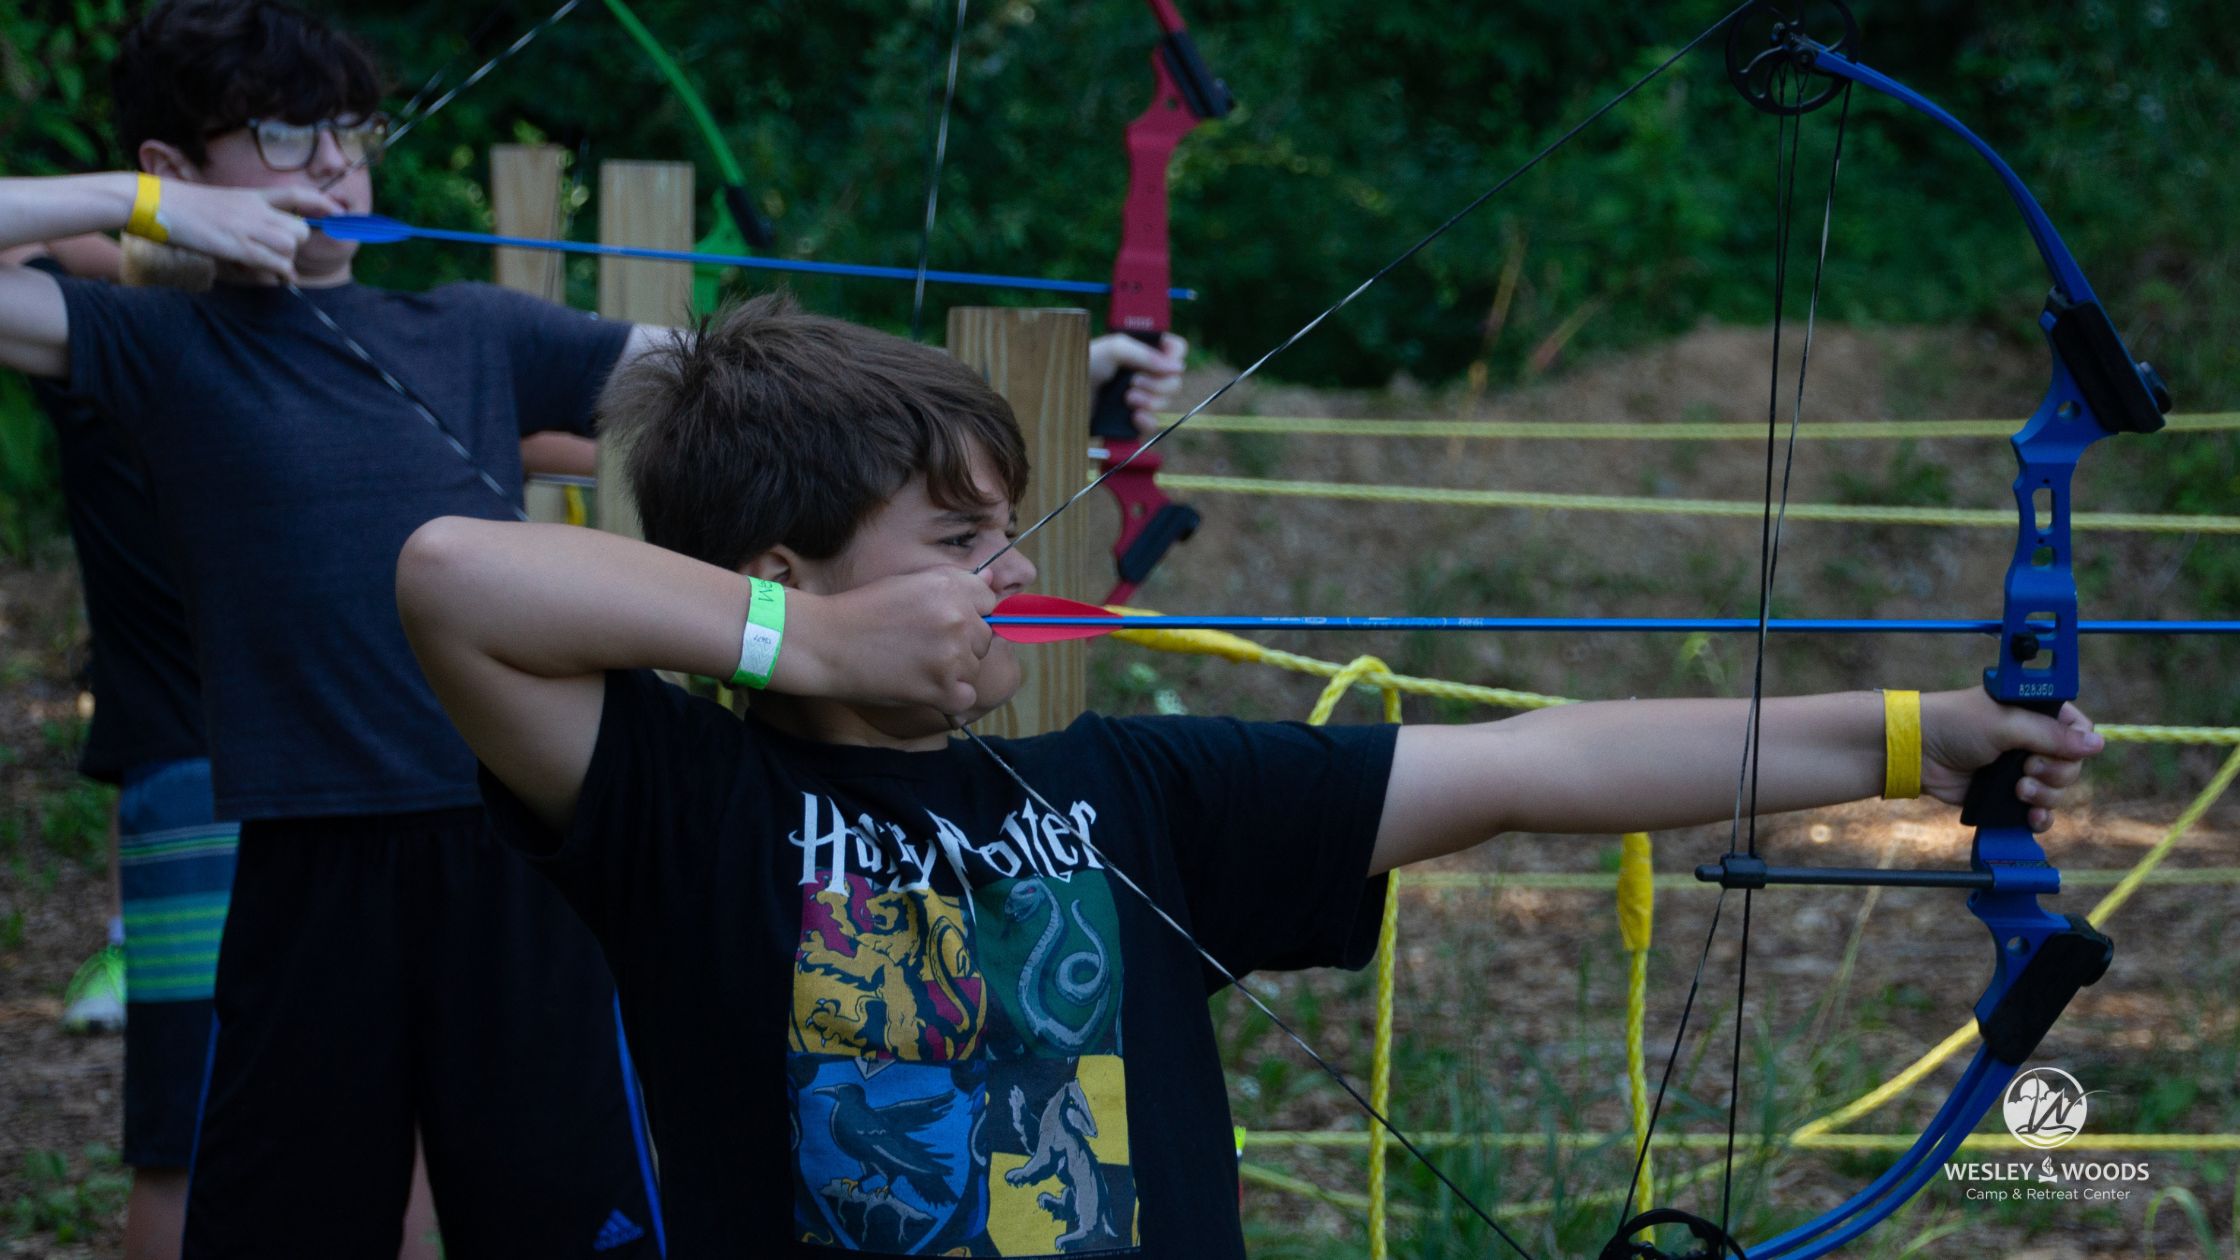 Young camper shoots an arrow on the archery range